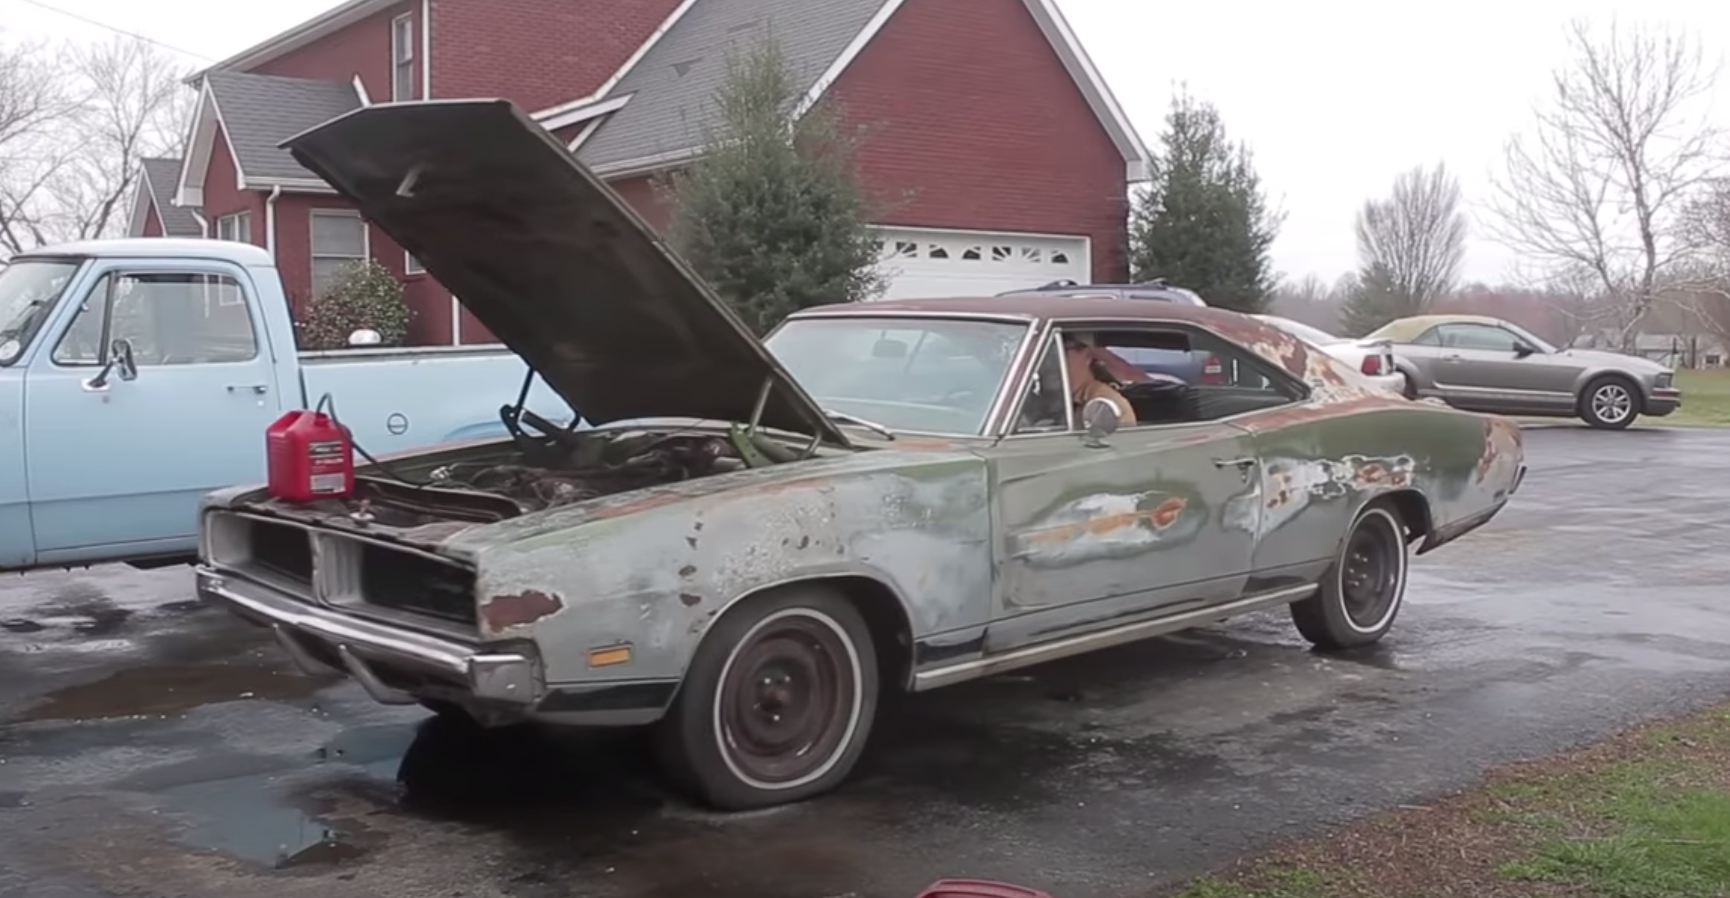 Abandoned 1969 Dodge Charger Finally Drives Under Own Power After 34 Years